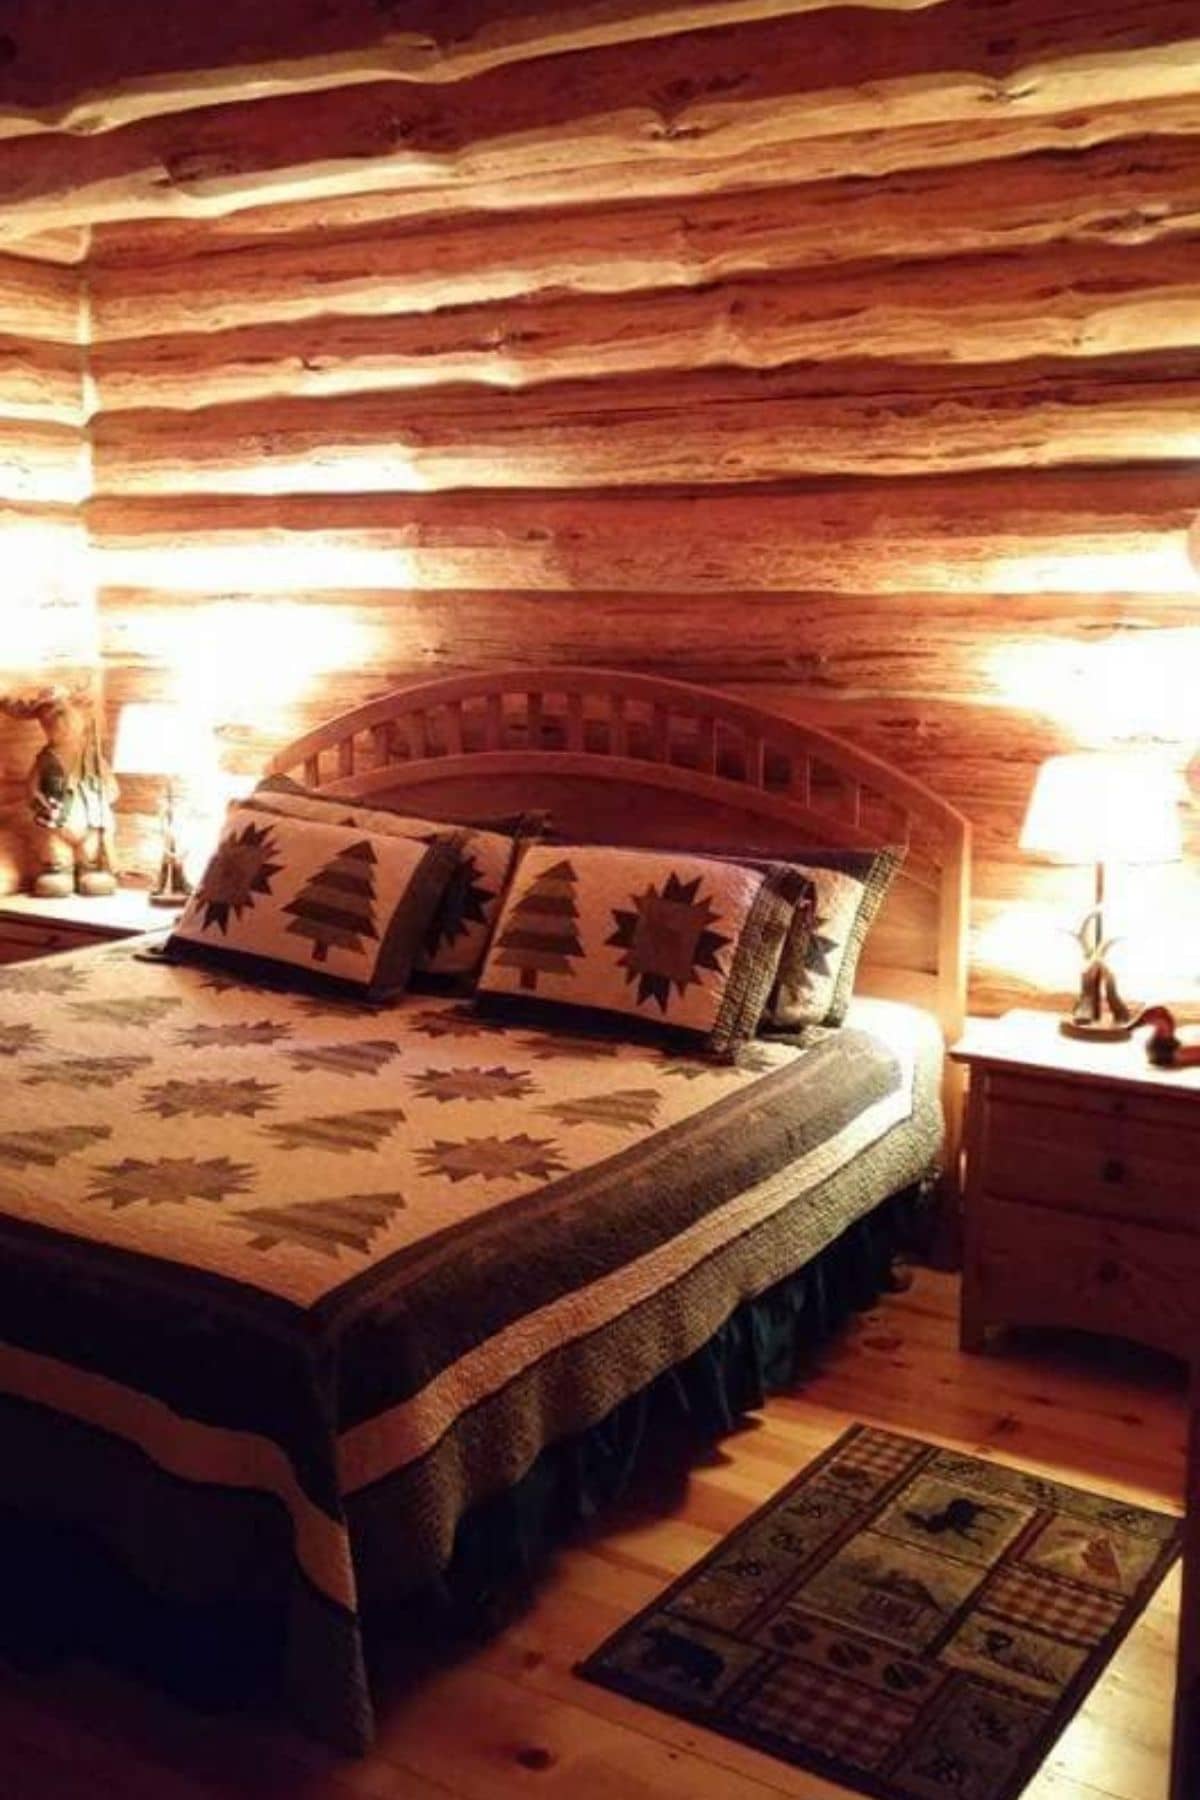 king size bed against log cabinw all